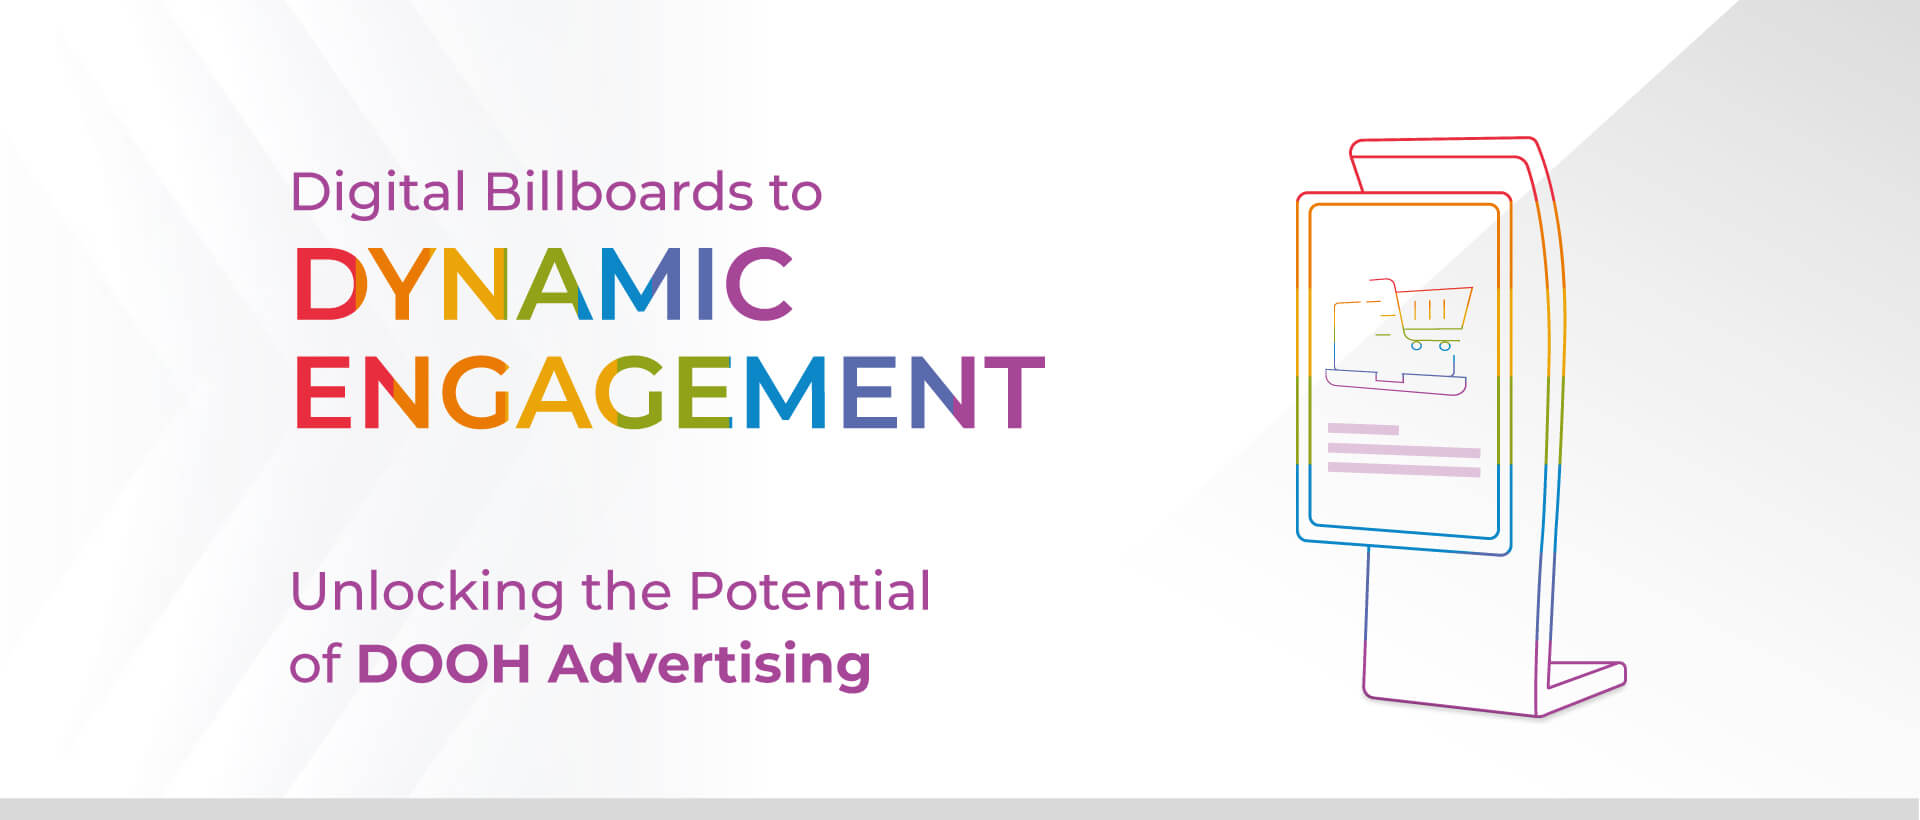 Digital Billboards to Dynamic Engagement  - Unlocking the Potential of DOOH Advertising